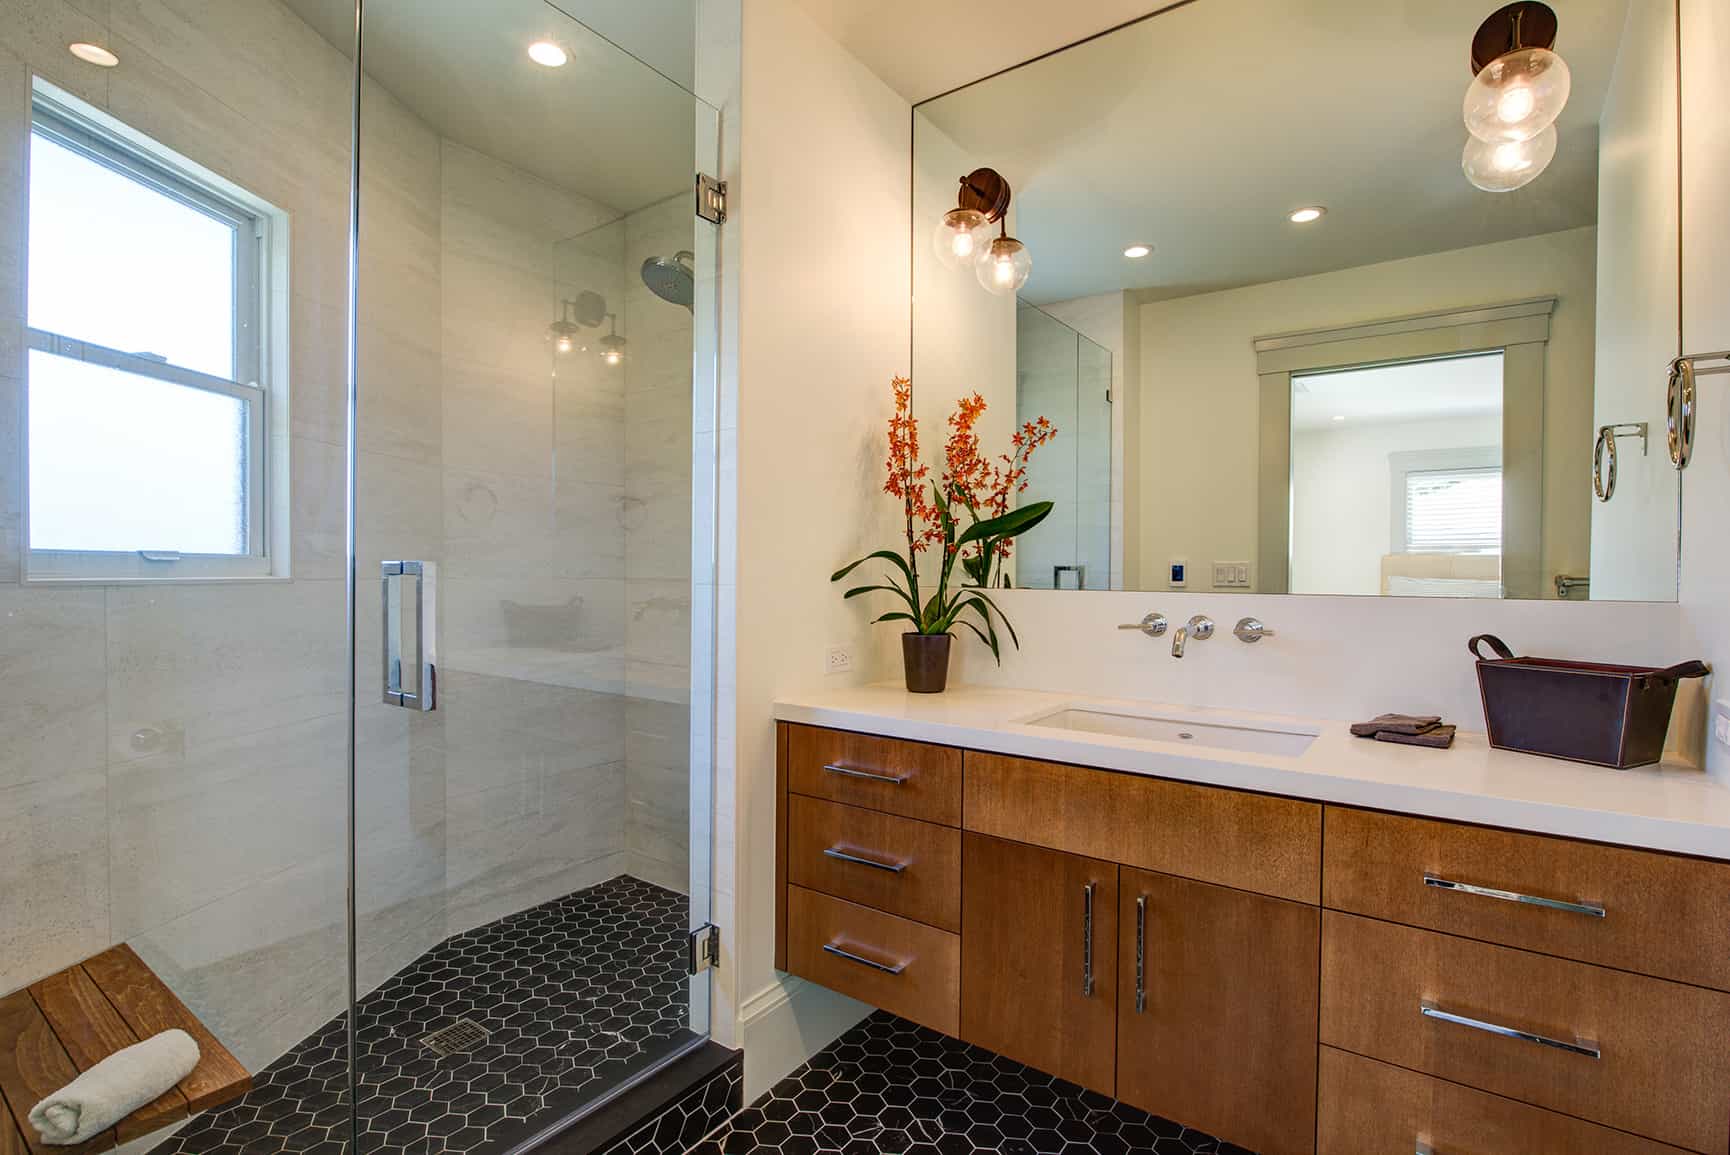 Interior of modern bathroom with vanity and shower.